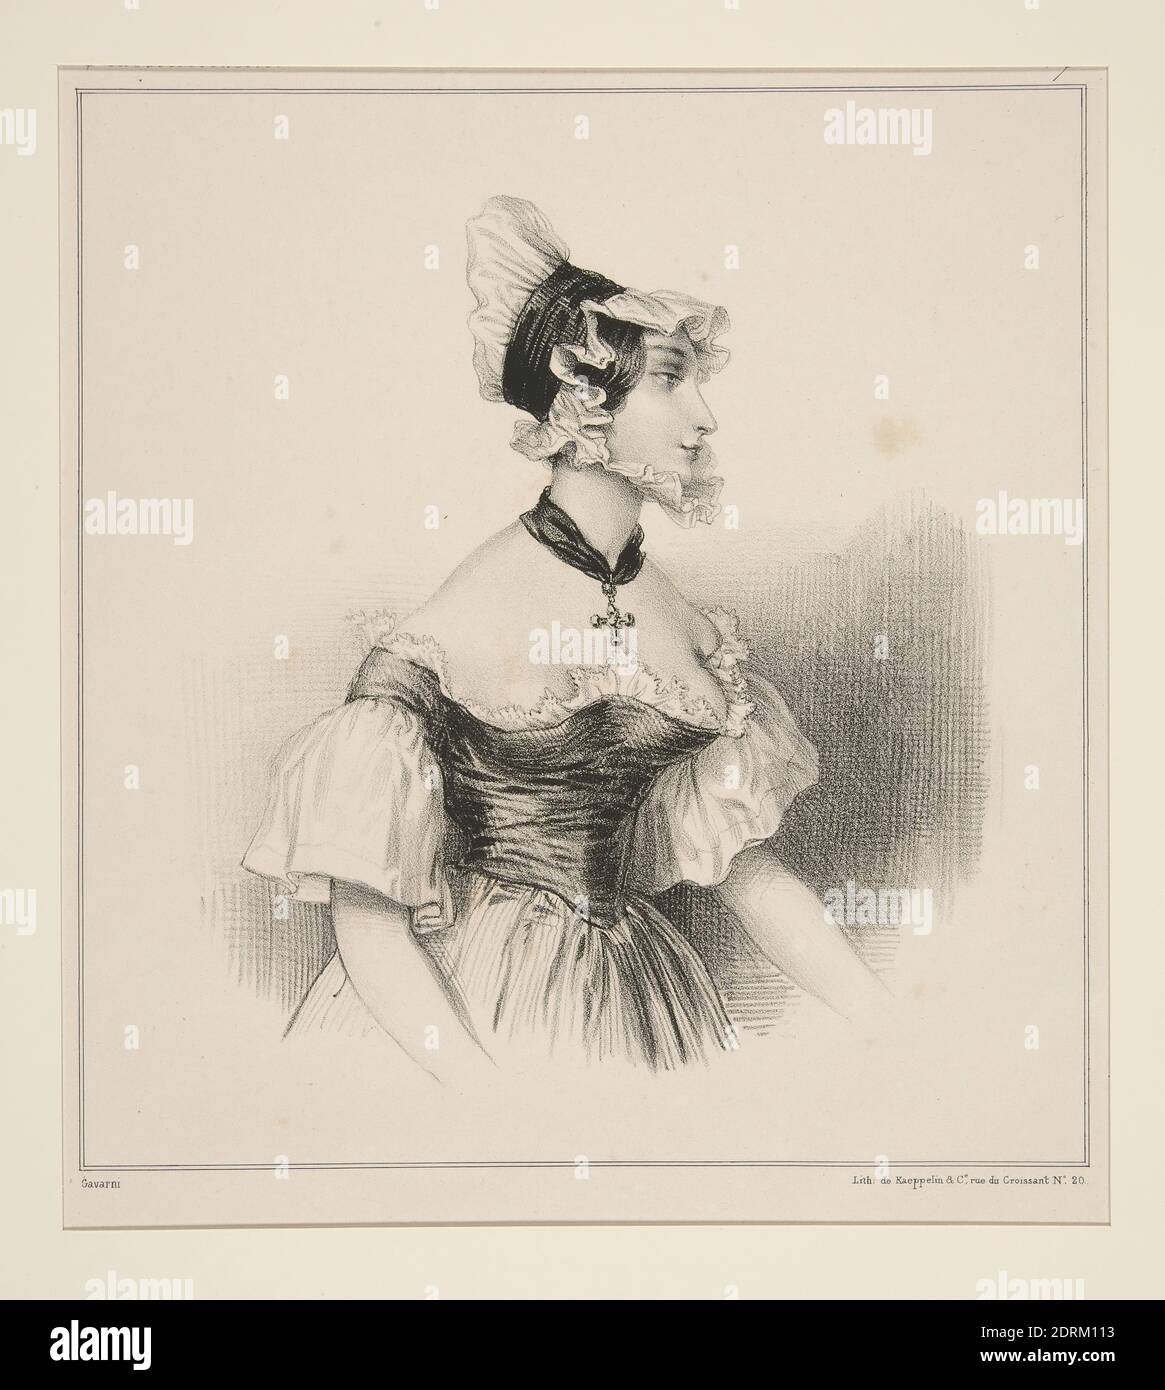 Artist: Paul Gavarni, French, 1804–1866, SOUBRETTE, Lithograph, French, 19th century, Works on Paper - Prints Stock Photo